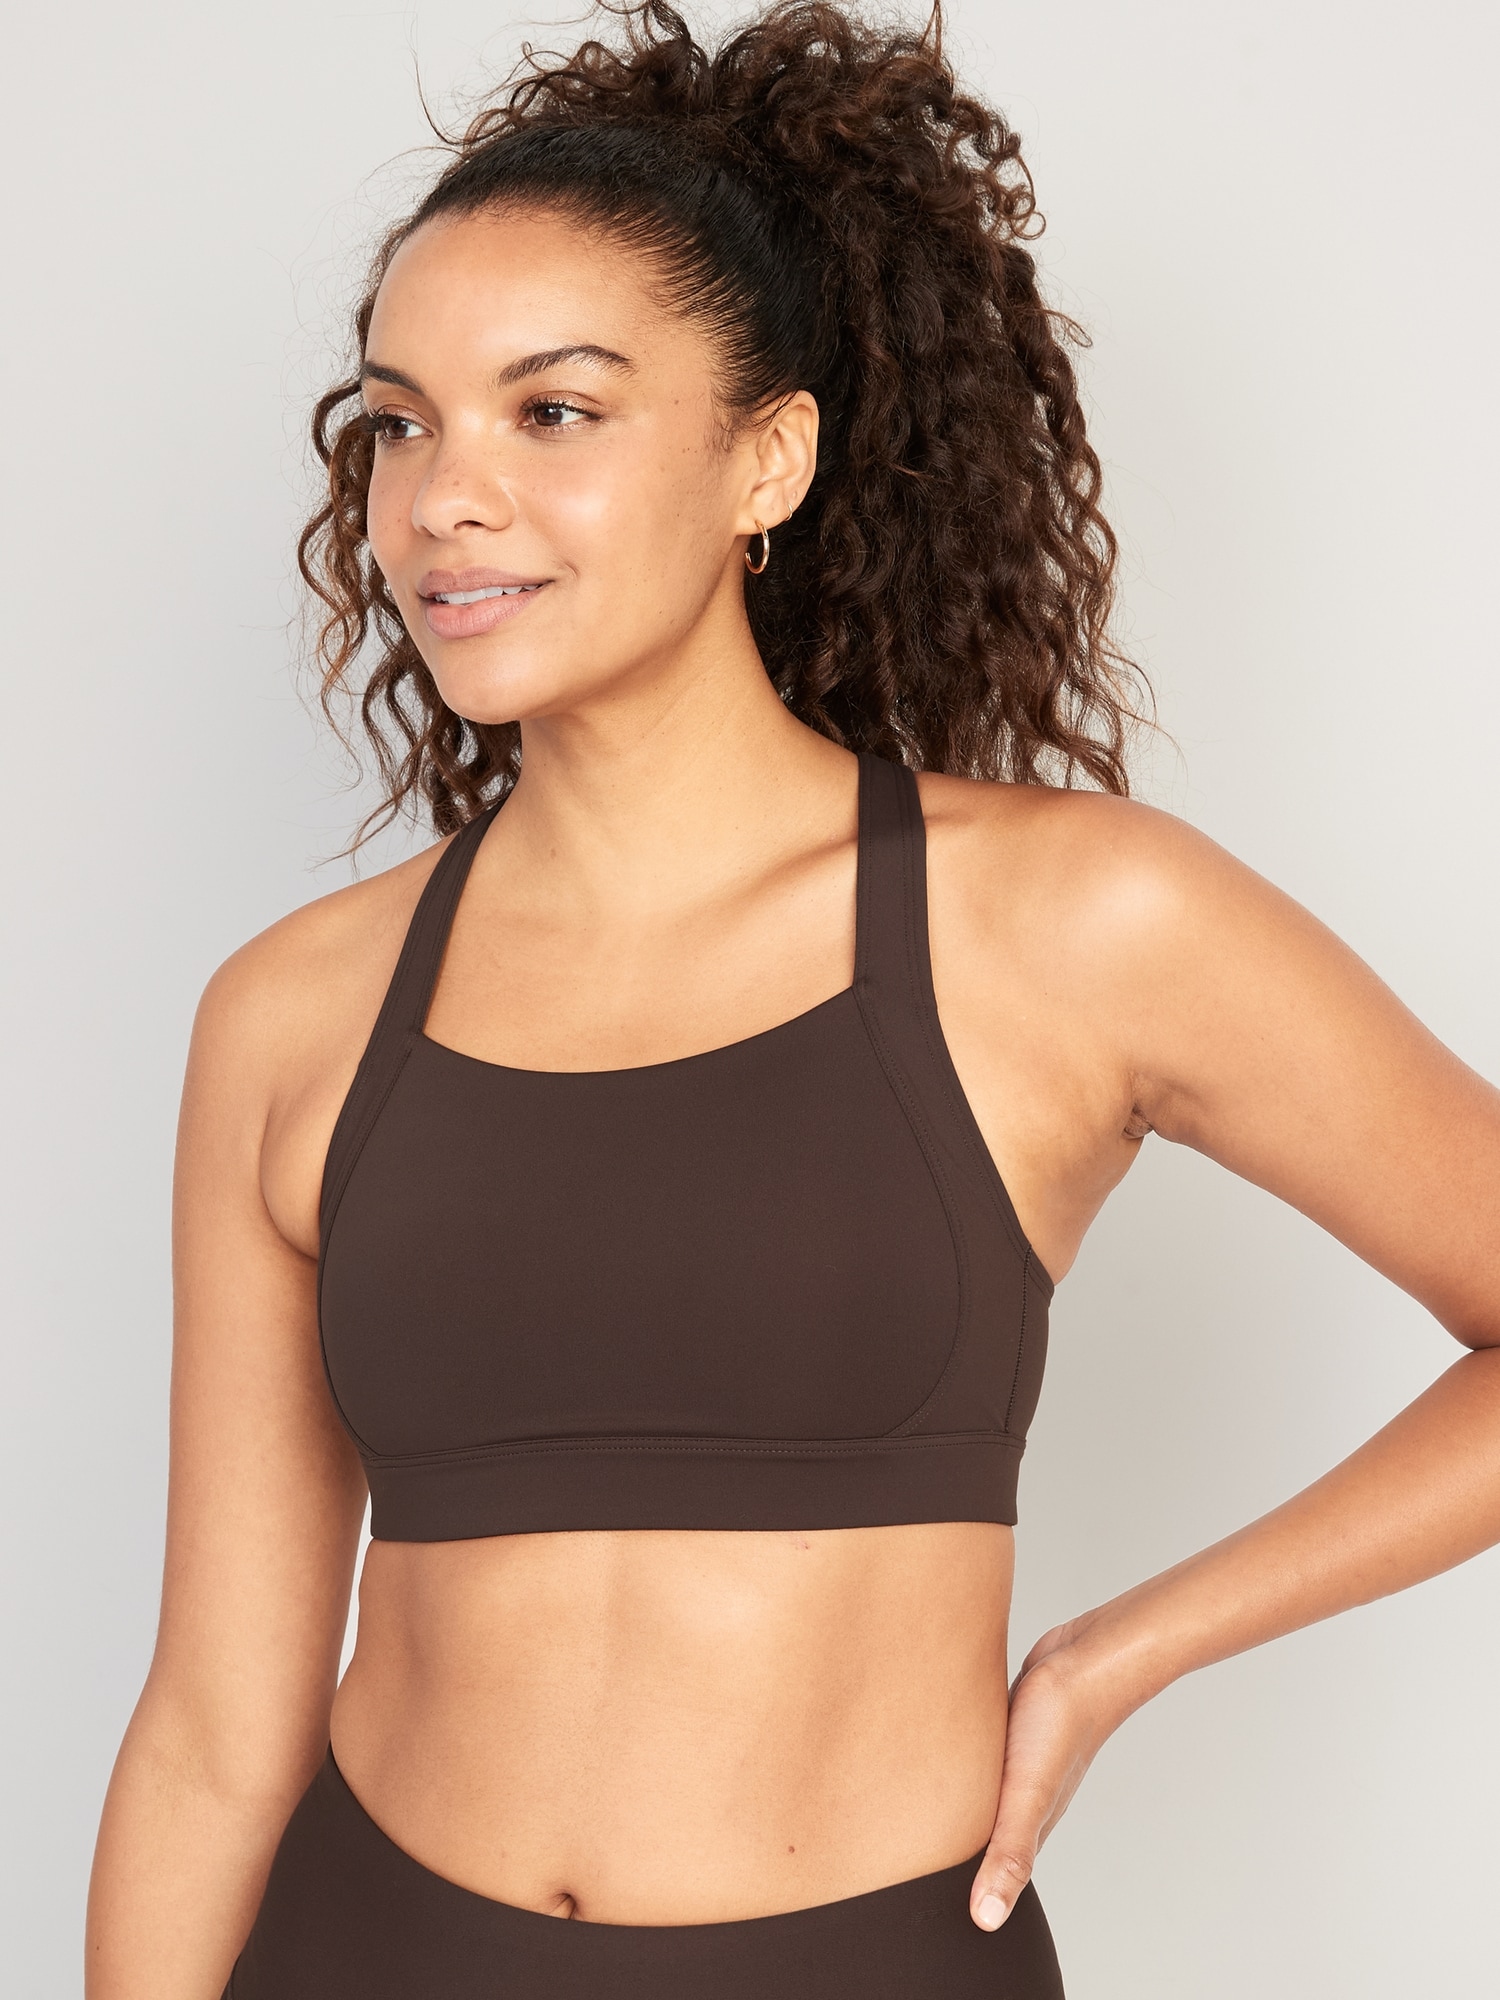 Old Navy - High Support PowerSoft Sports Bra for Women XS-XXL brown